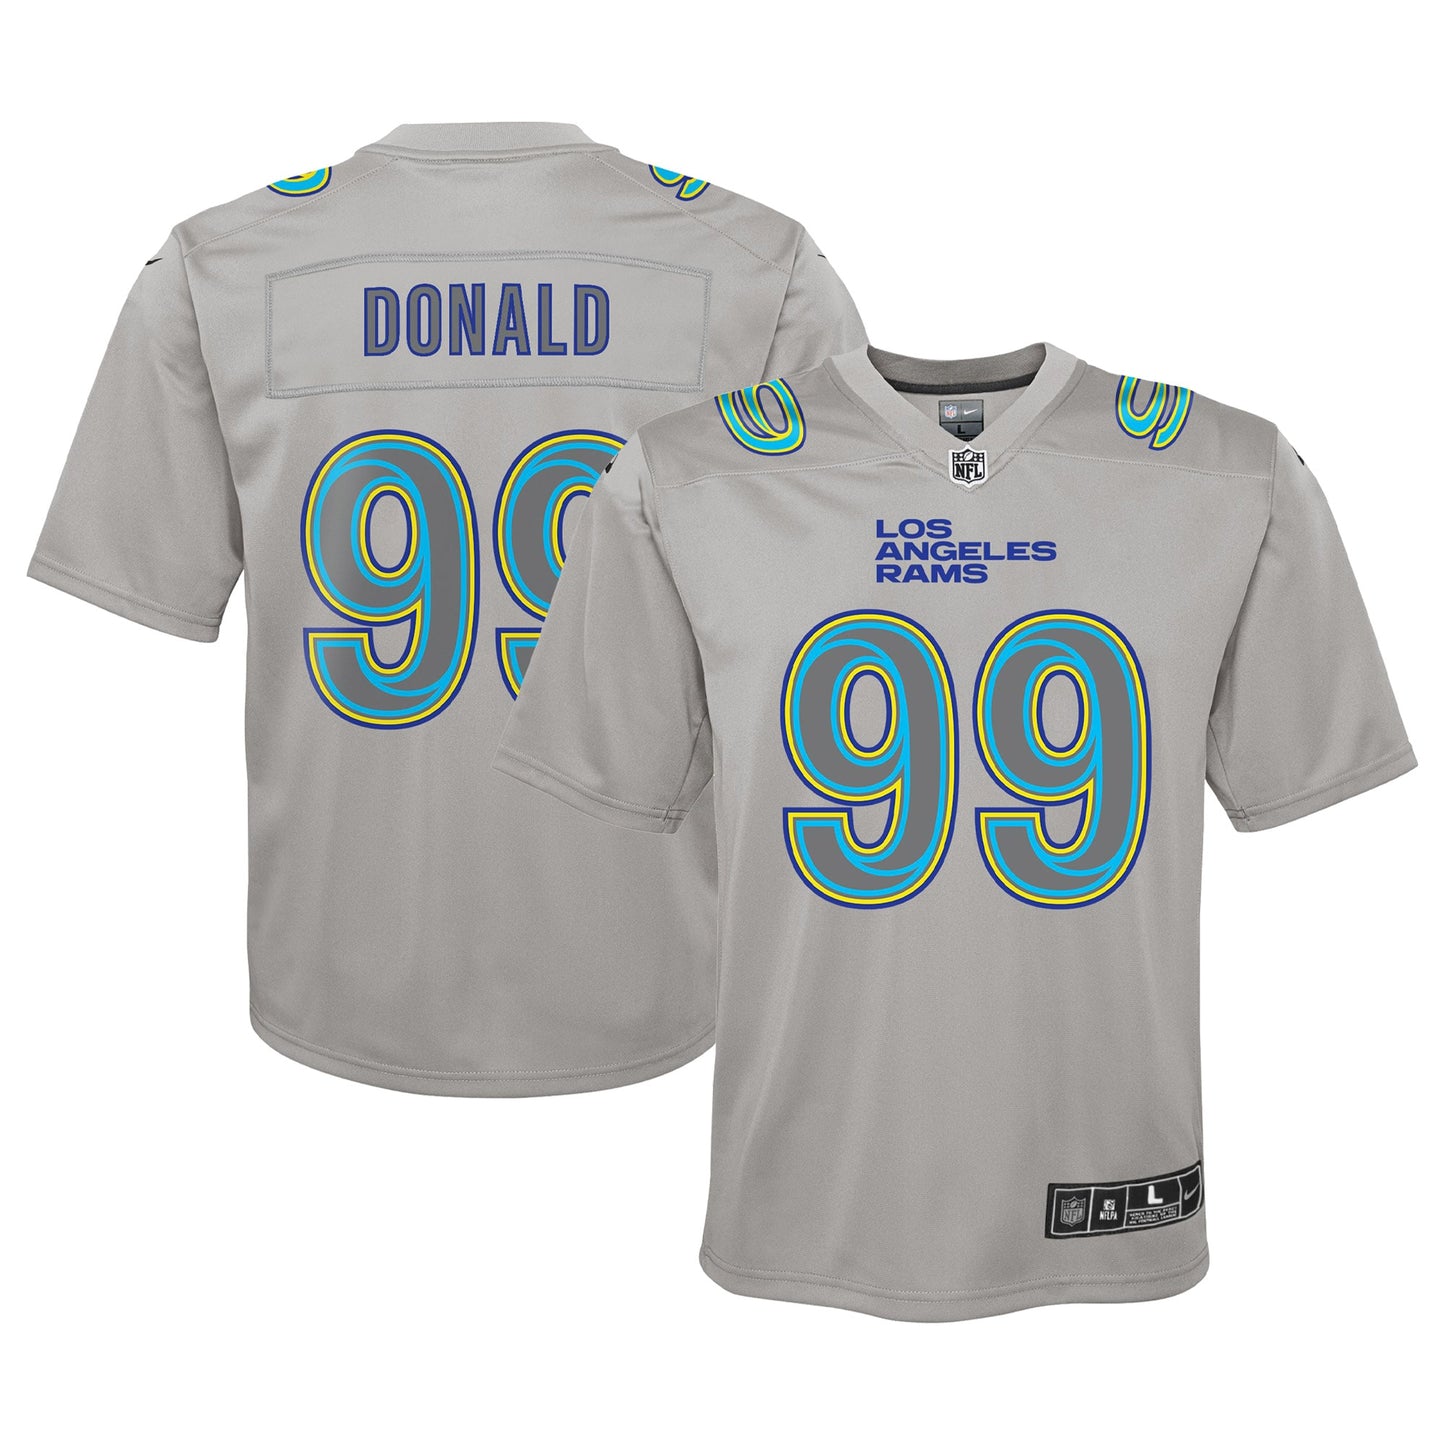 Aaron Donald Los Angeles Rams Nike Youth Atmosphere Game Jersey - Gray